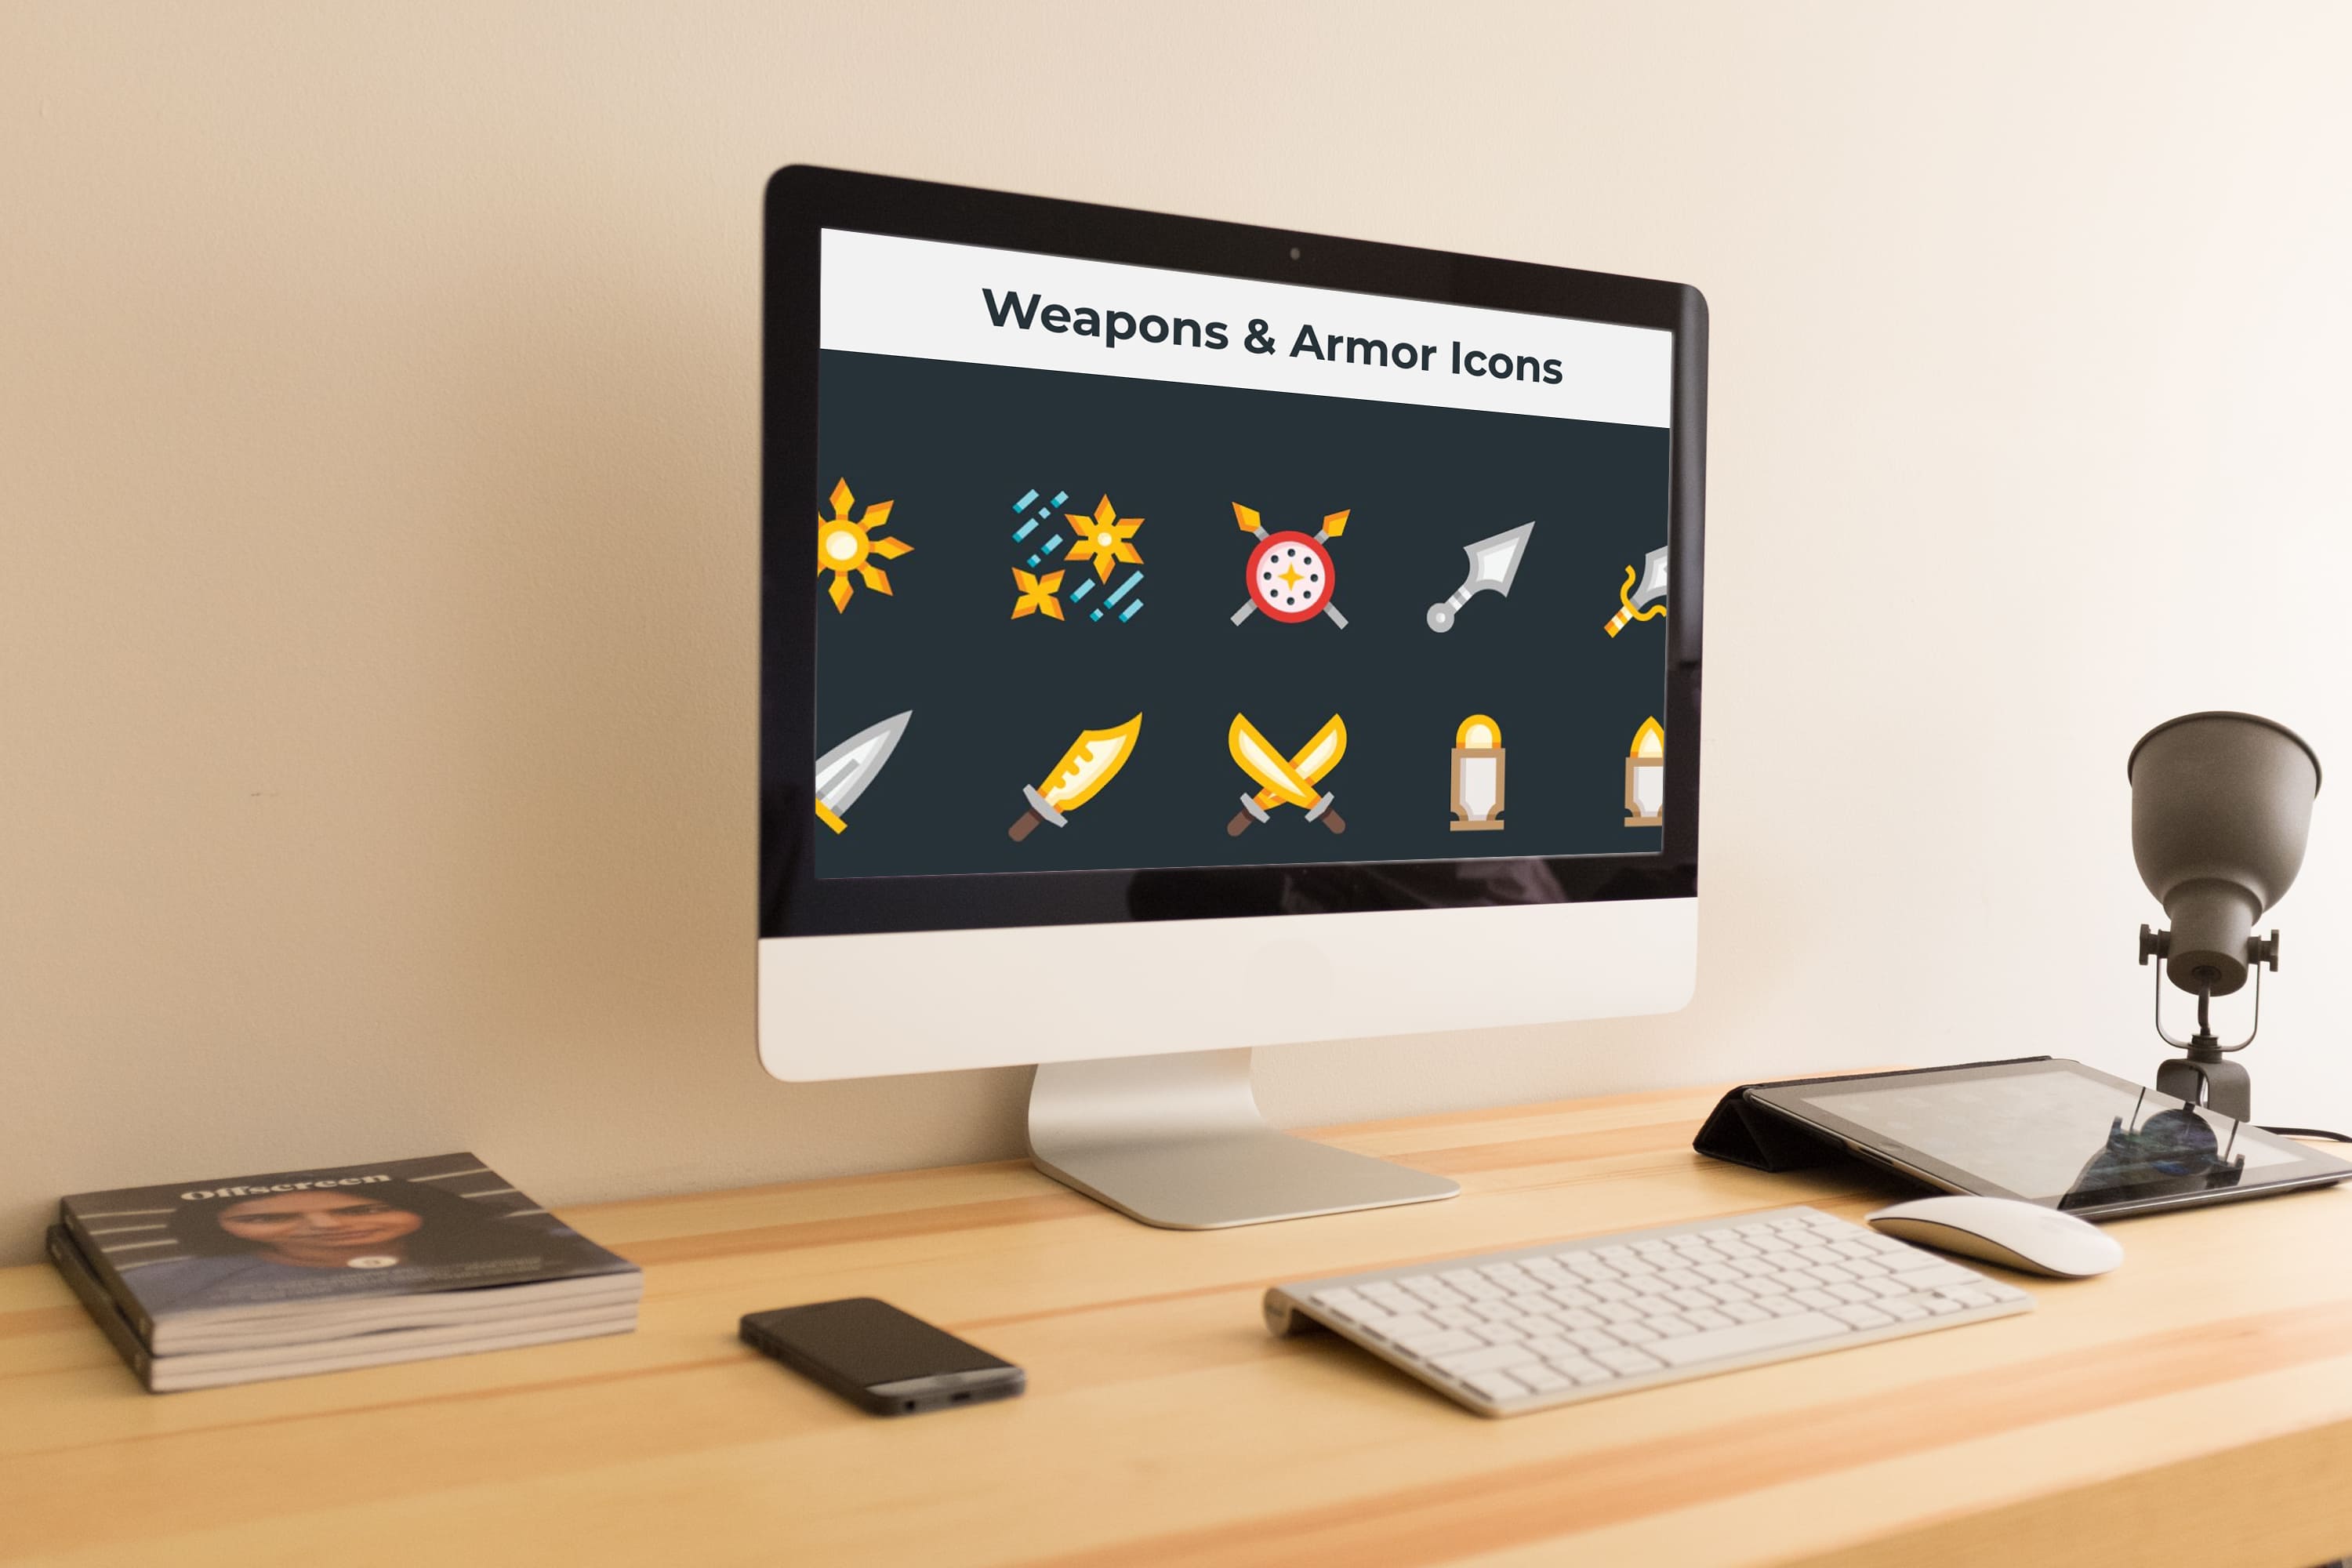 Desktop option of the Weapons & Armor Icons.